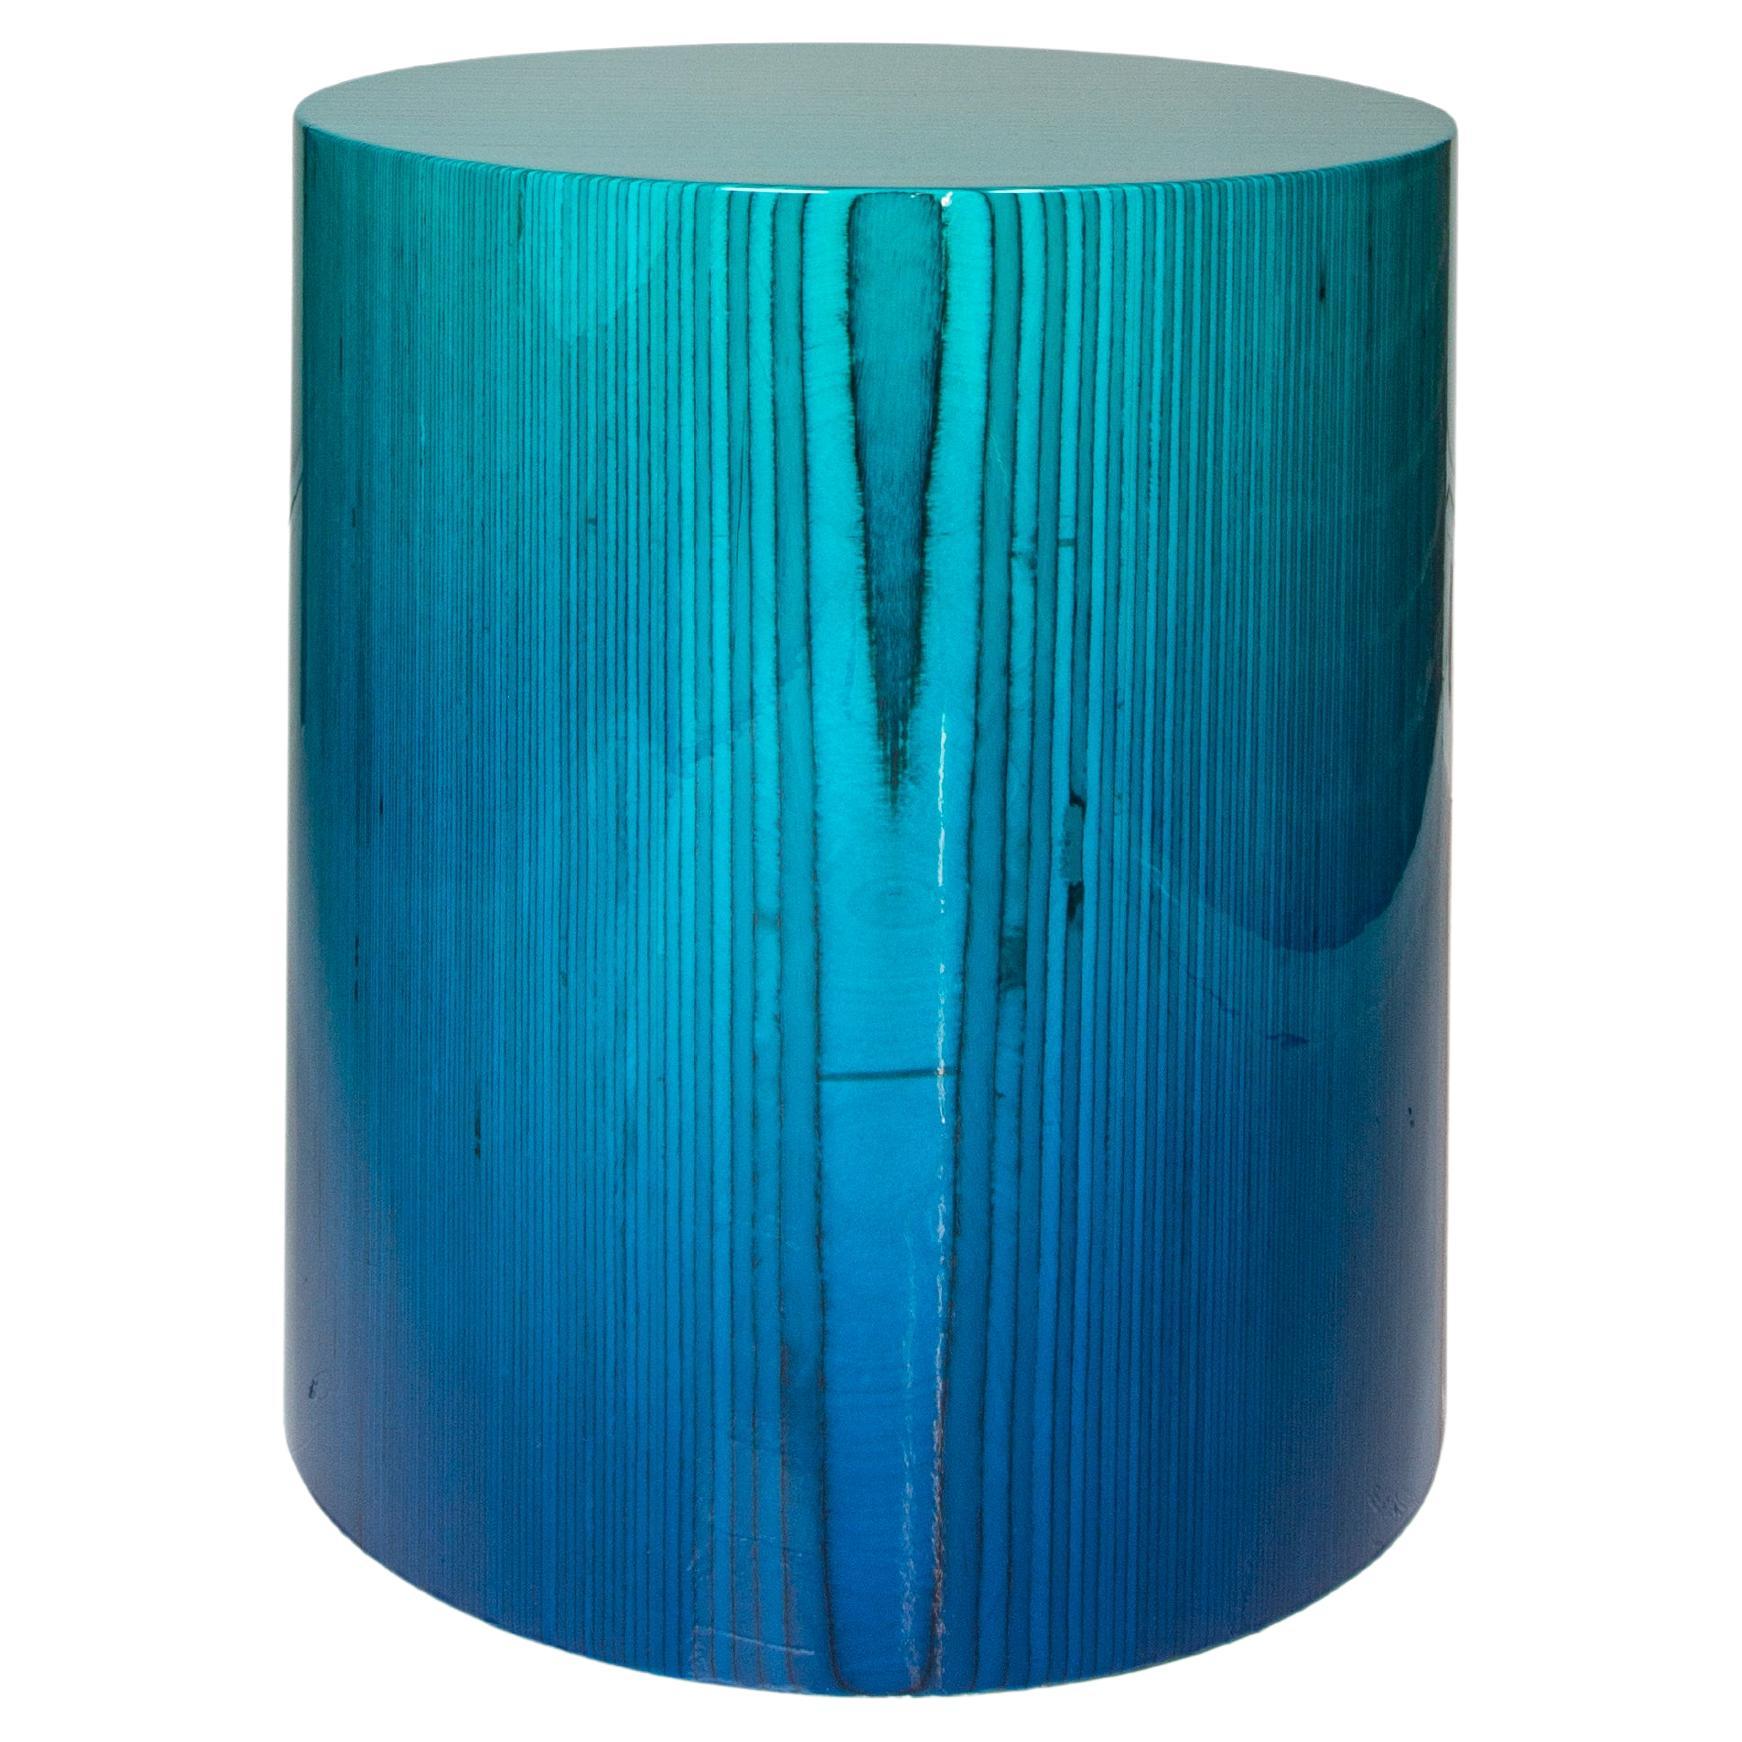 Stack Vert Stool or Side Table in Teal by Timbur, Represented by Tuleste Factory